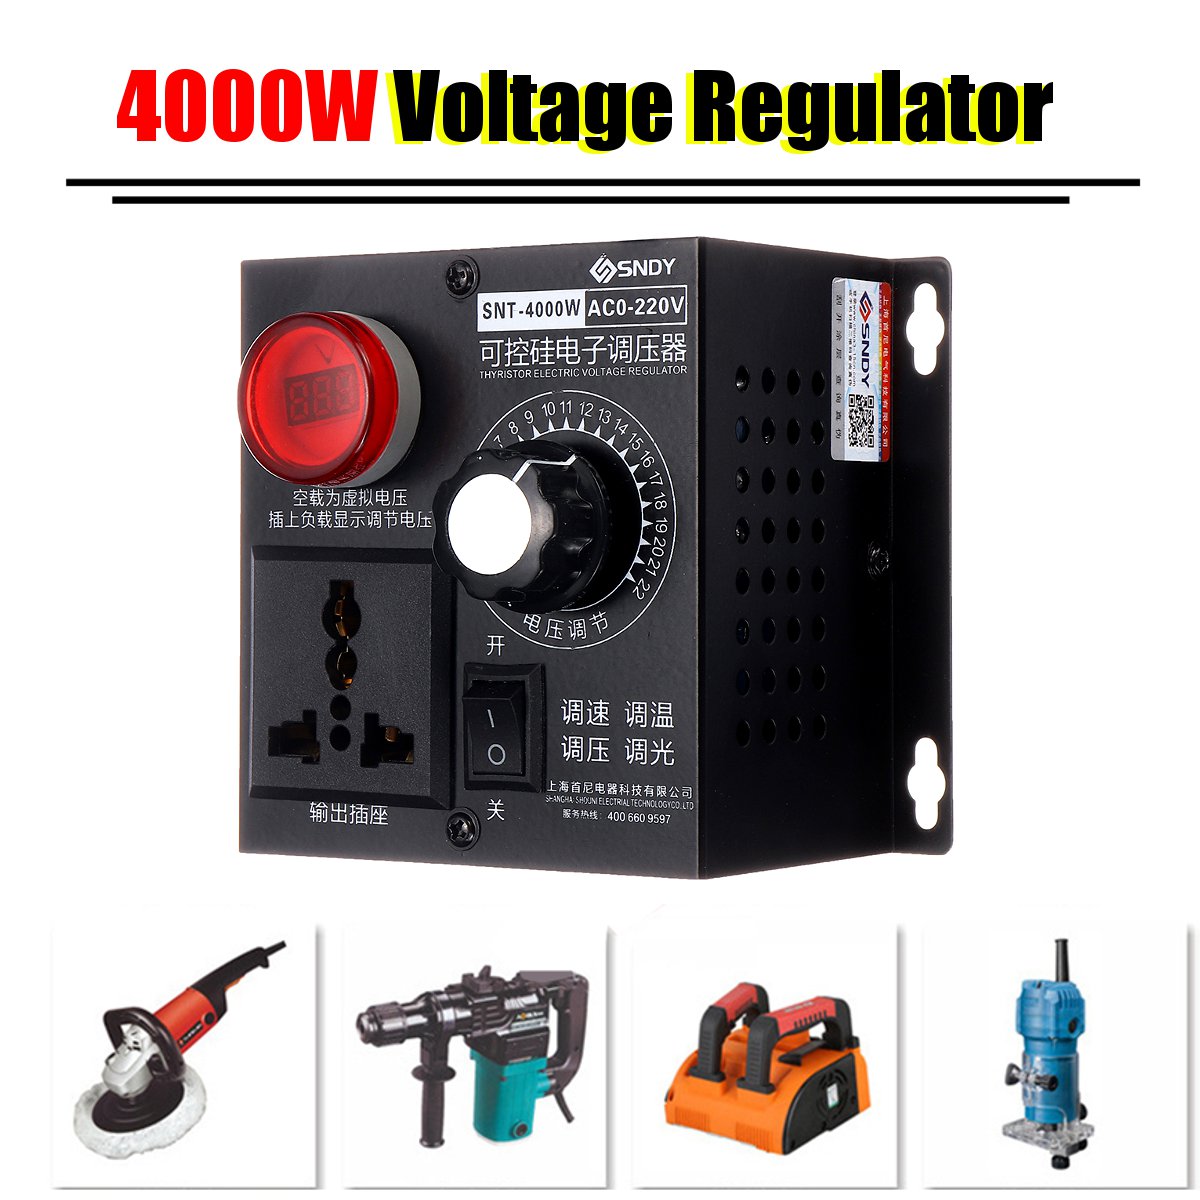 AC 0V-220V 4000W High Power Silicon Electronics Voltage Regulator Machinery Electric Variable Speed Controller